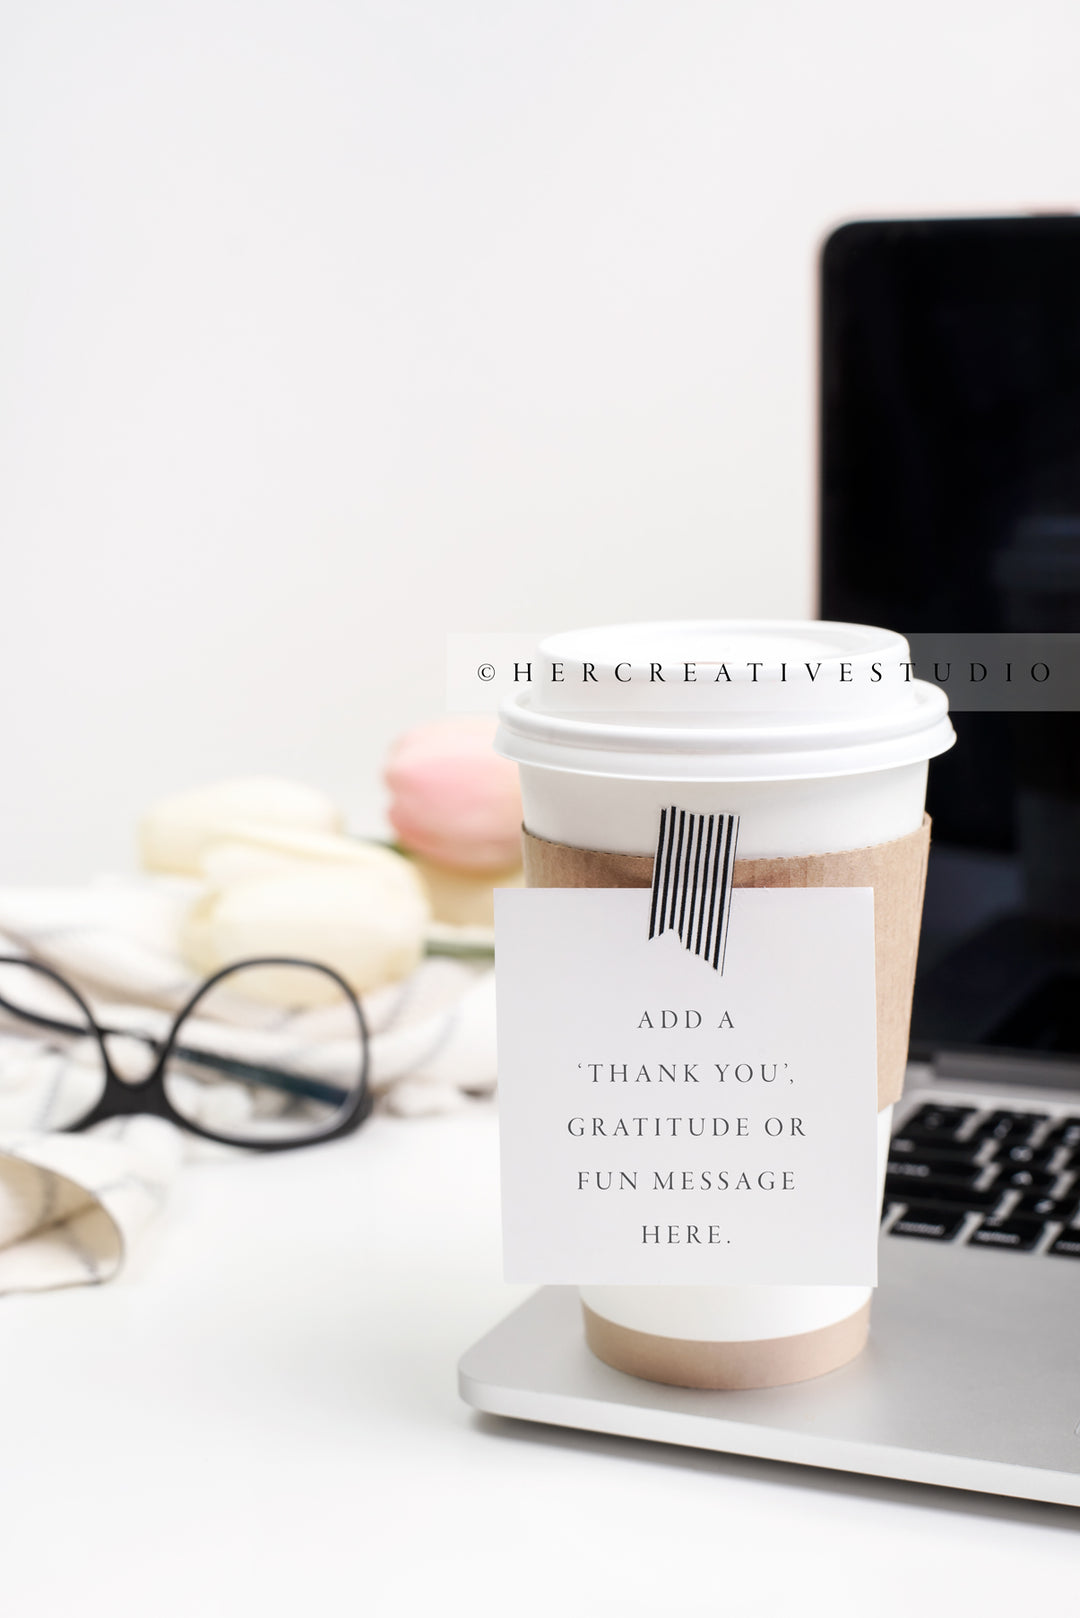 Coffee Cup with Note on Laptop, Styled Image